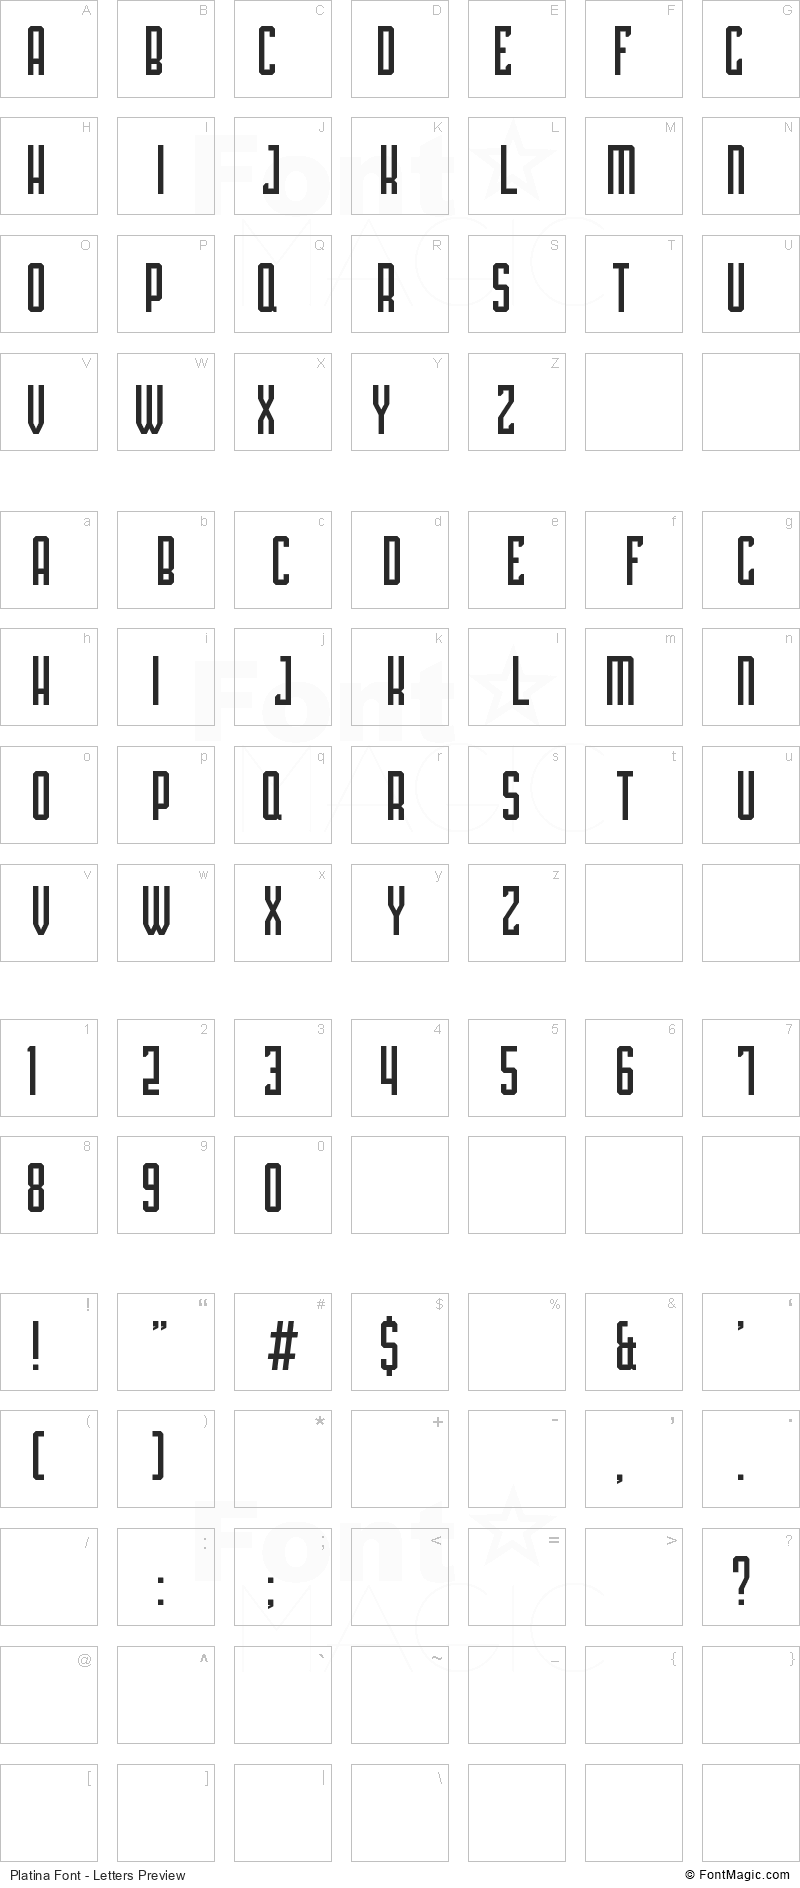 Platina Font - All Latters Preview Chart